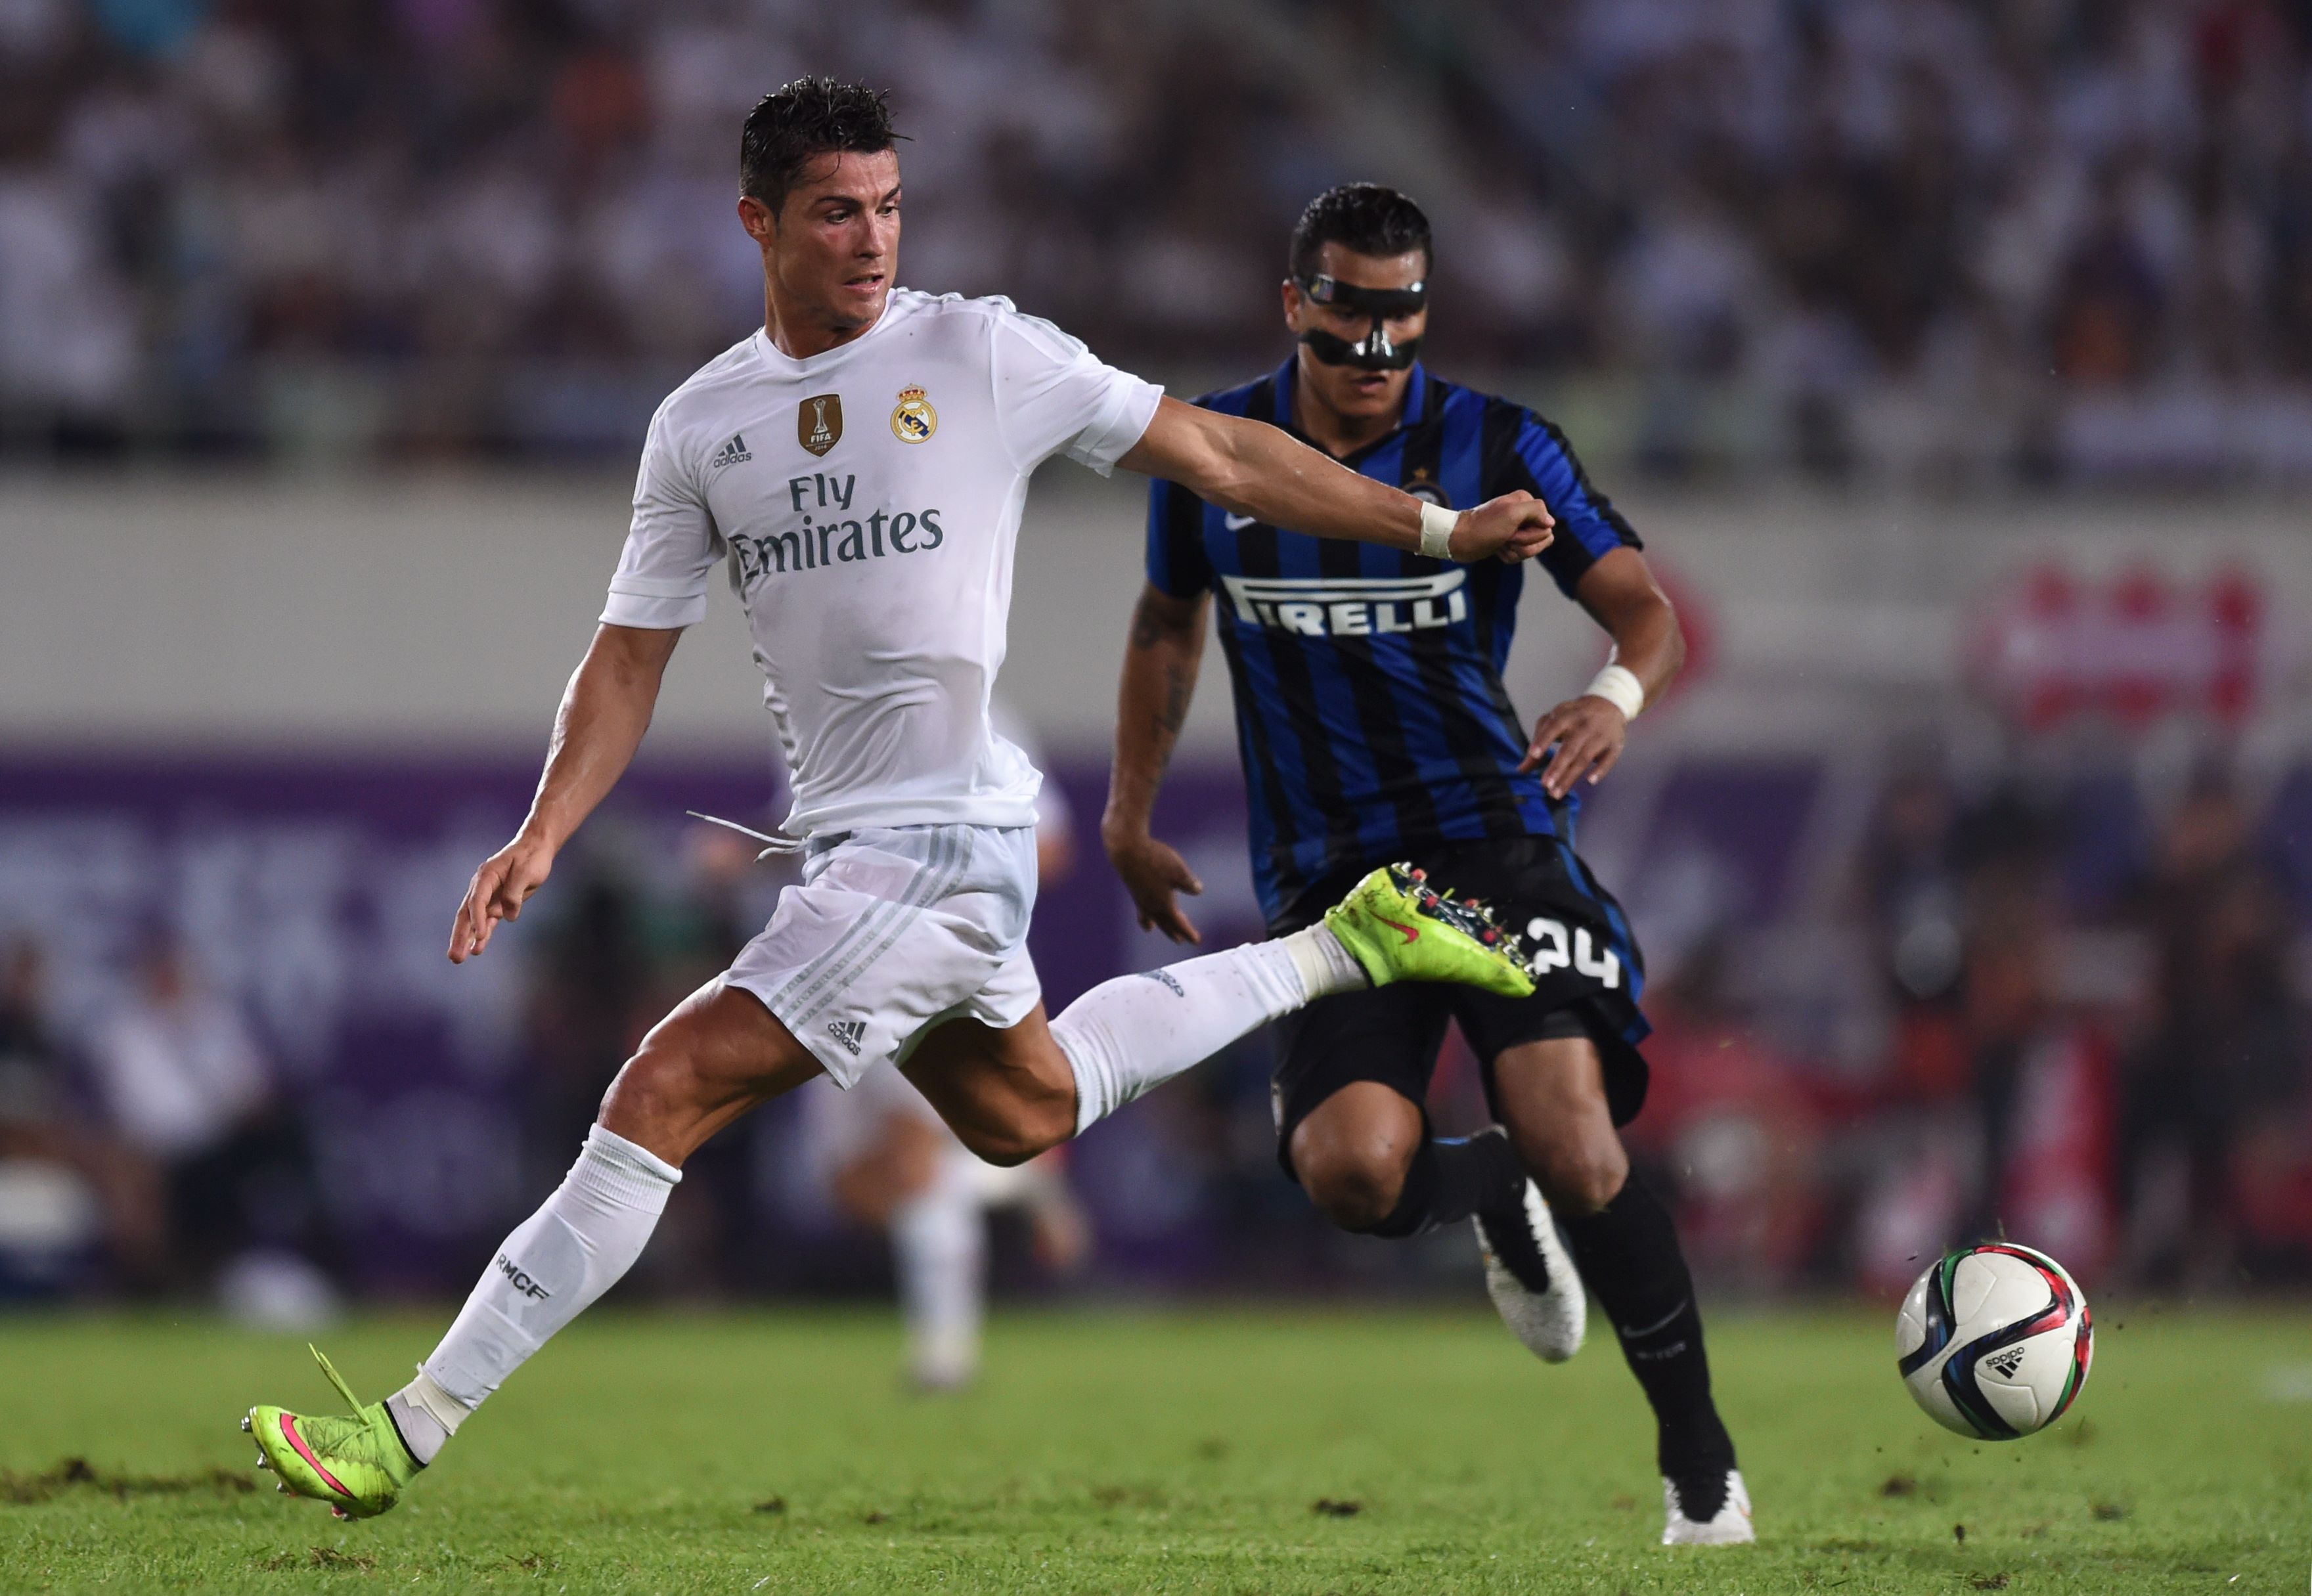 Real Madrid's Cristiano Ronaldo (left) and Inter Milan's Jeison Murillo vie for the ball during their International Champions Cup match in Guangzhou on Monday. Photo: AFP